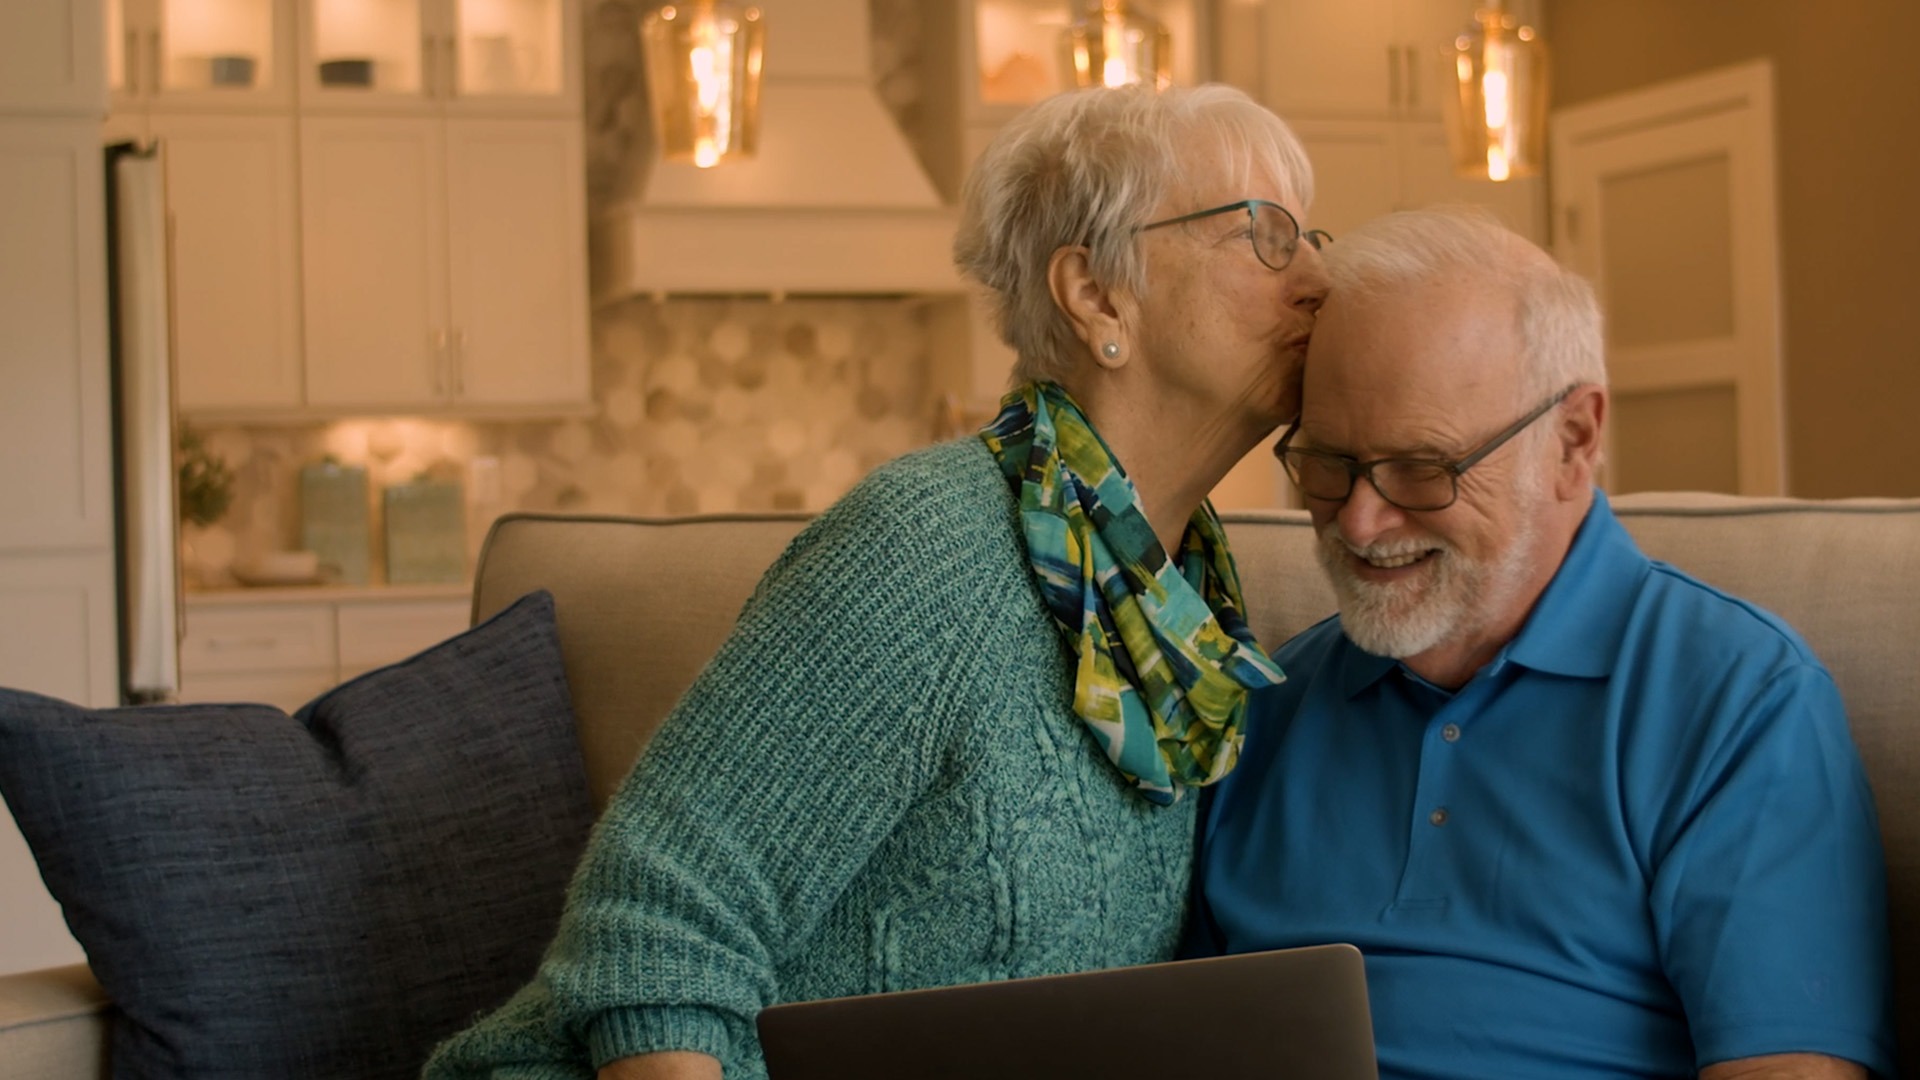 Epcon homeowners Chip and Sharon found more time to enjoy the things they love when they purchased an Epcon home.